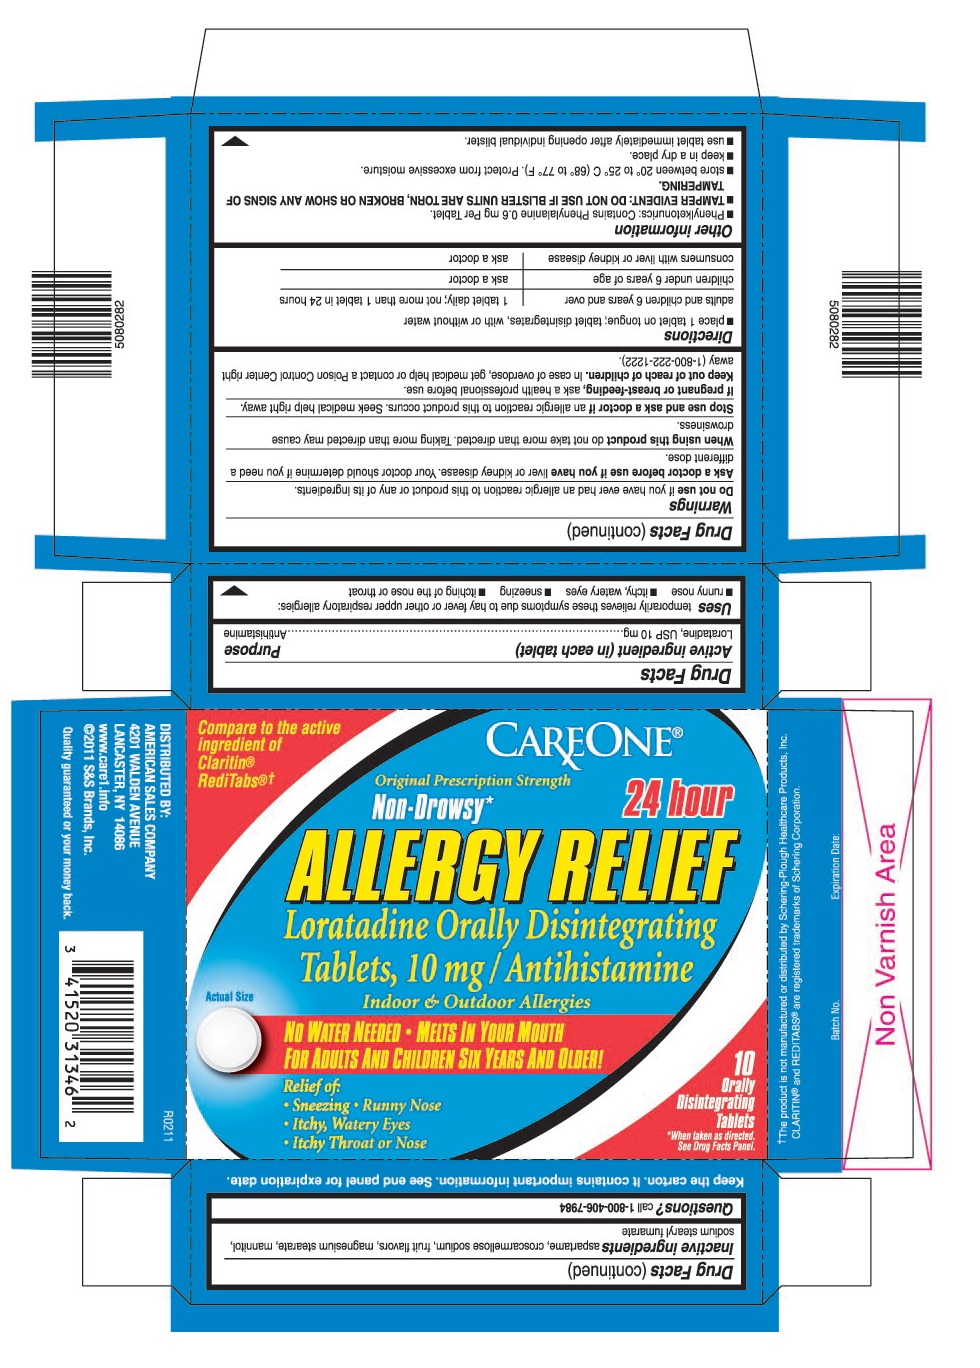 This is the 10 count blister carton label for Careone Loratadine ODT, 10 mg.